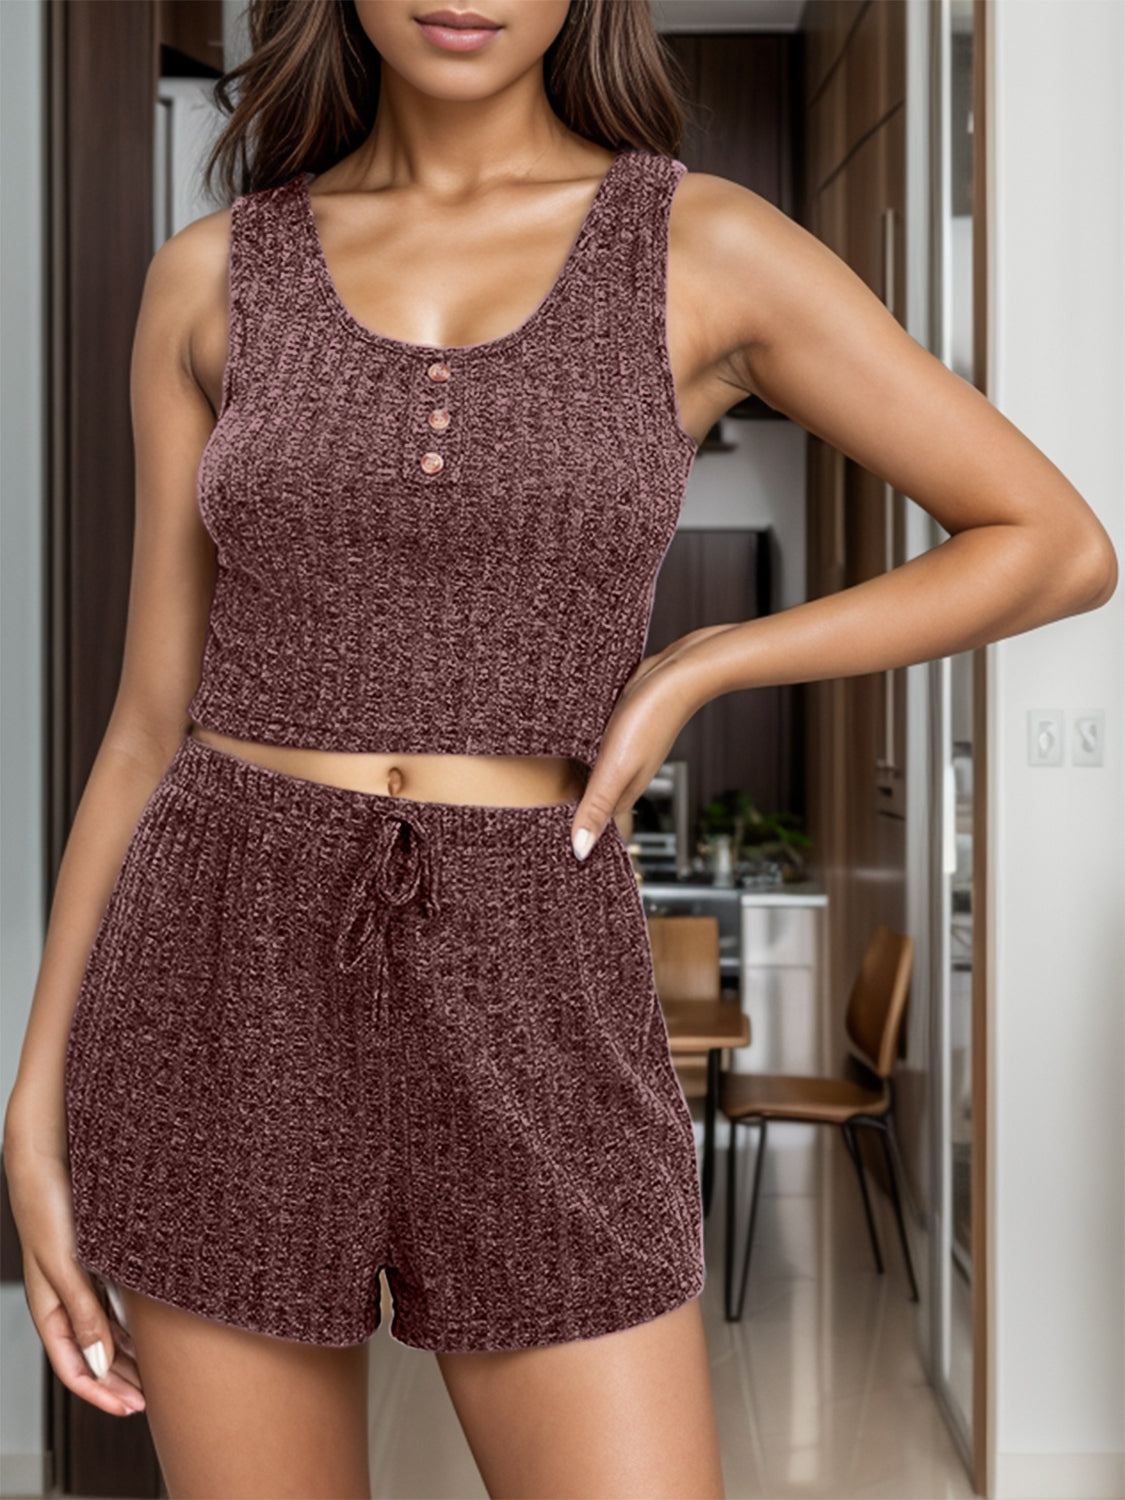 Discover ultimate comfort with our Scoop Neck Top & Shorts Set, perfect for relaxed days at home or casual outings. Luxurious loungewear awaits.